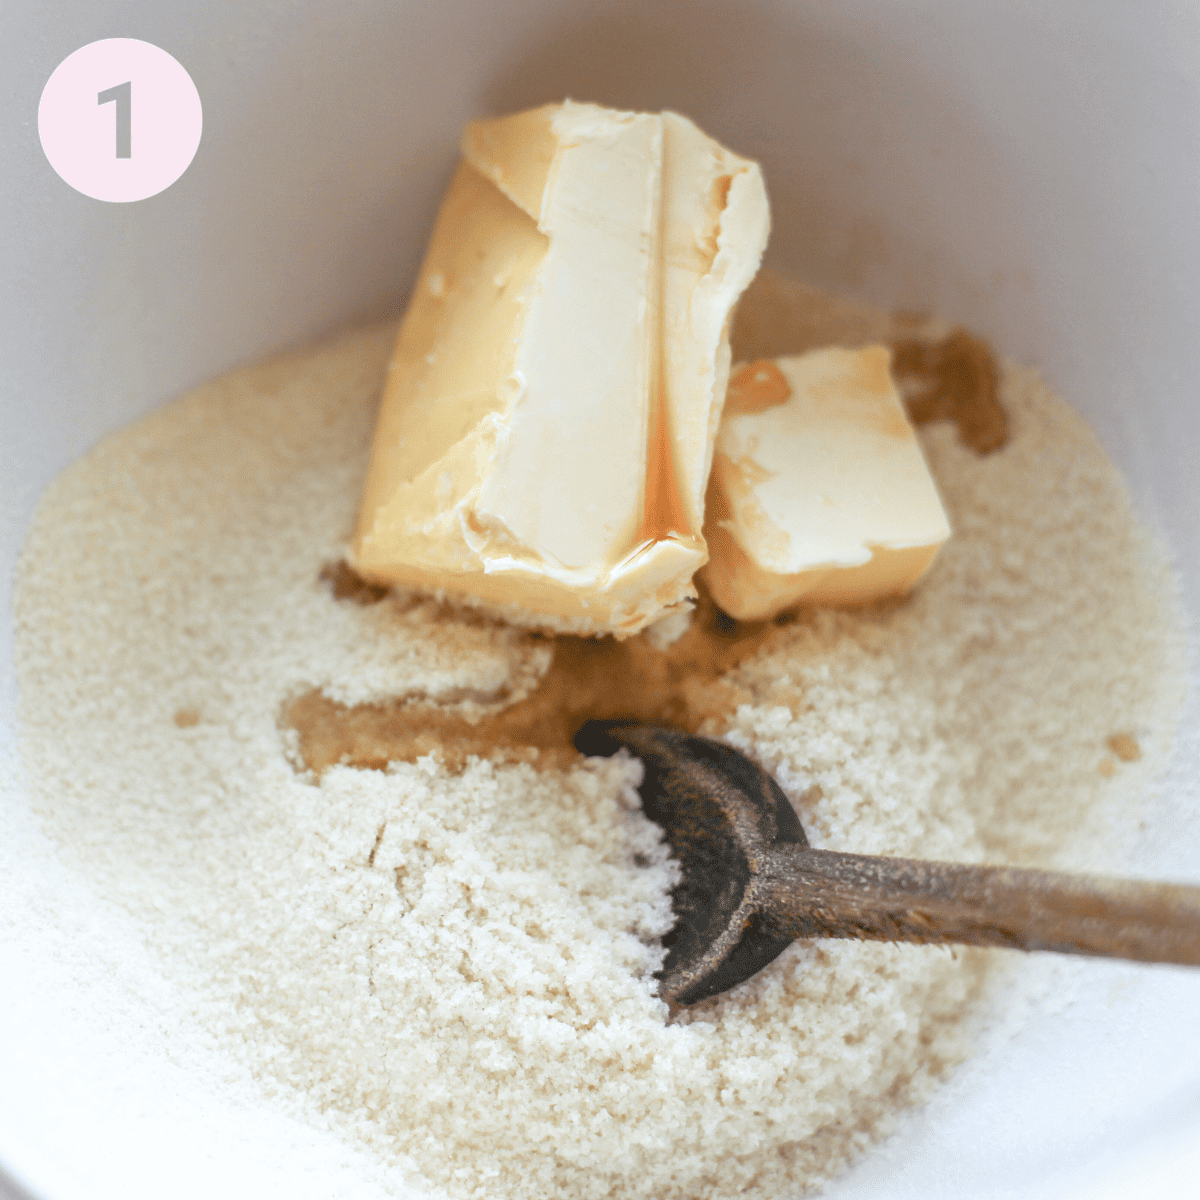 Mixing butter, flour and sugar in a bowl.